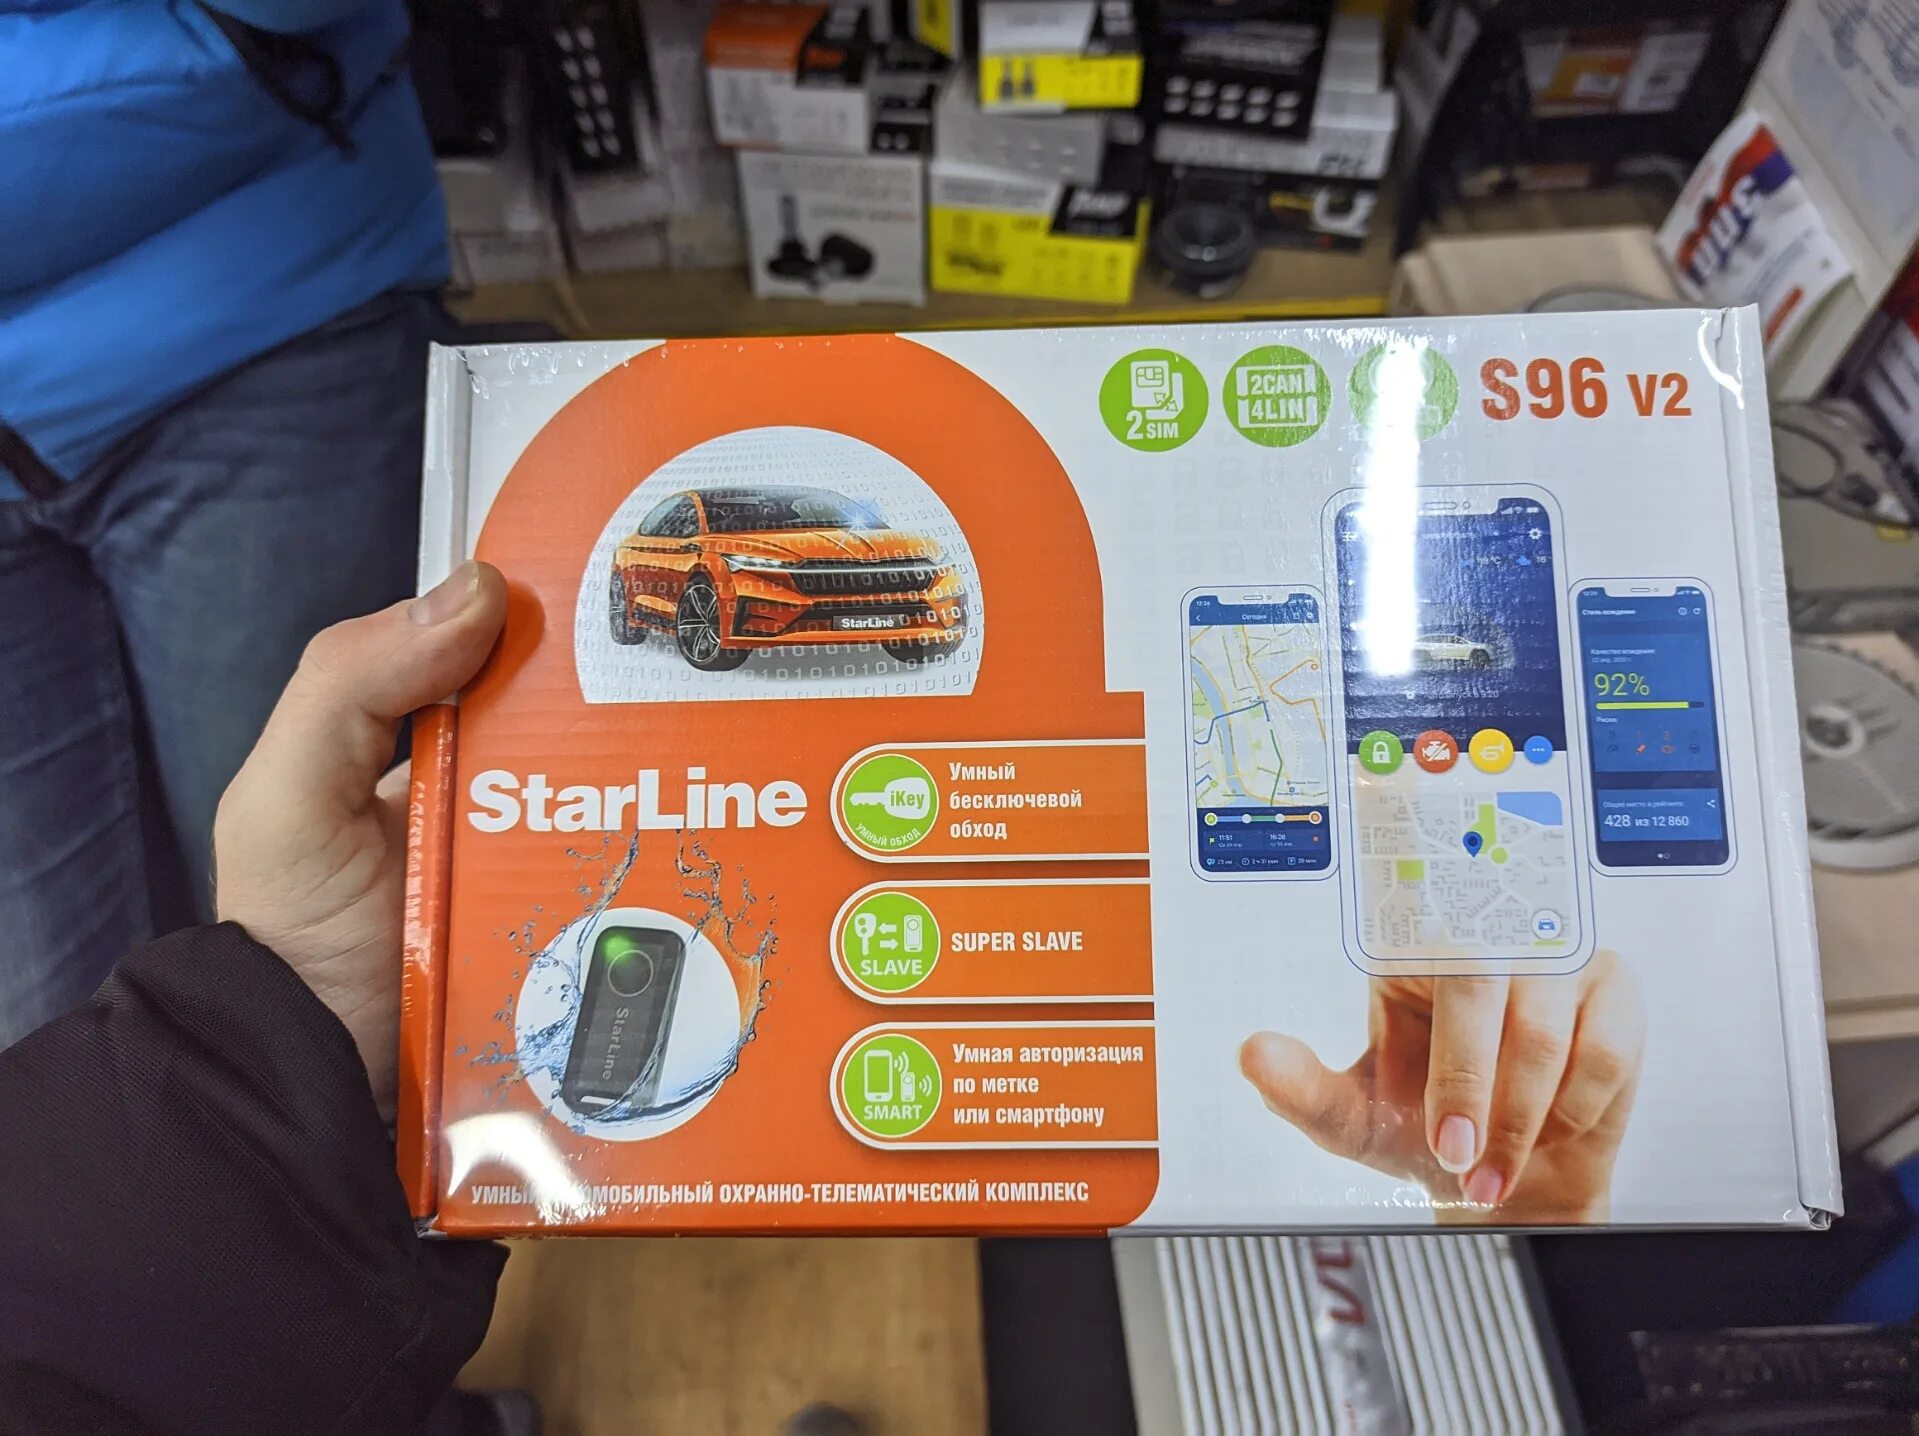 Starline s96 bt gsm 2can 4lin. Старлайн s96 v2 GSM GPS. STARLINE s96 GSM. Автосигнализация STARLINE s96 v2 BT 2can+4lin 2sim GSM. STARLINE s96 v2 2can+4lin 2sim GSM.